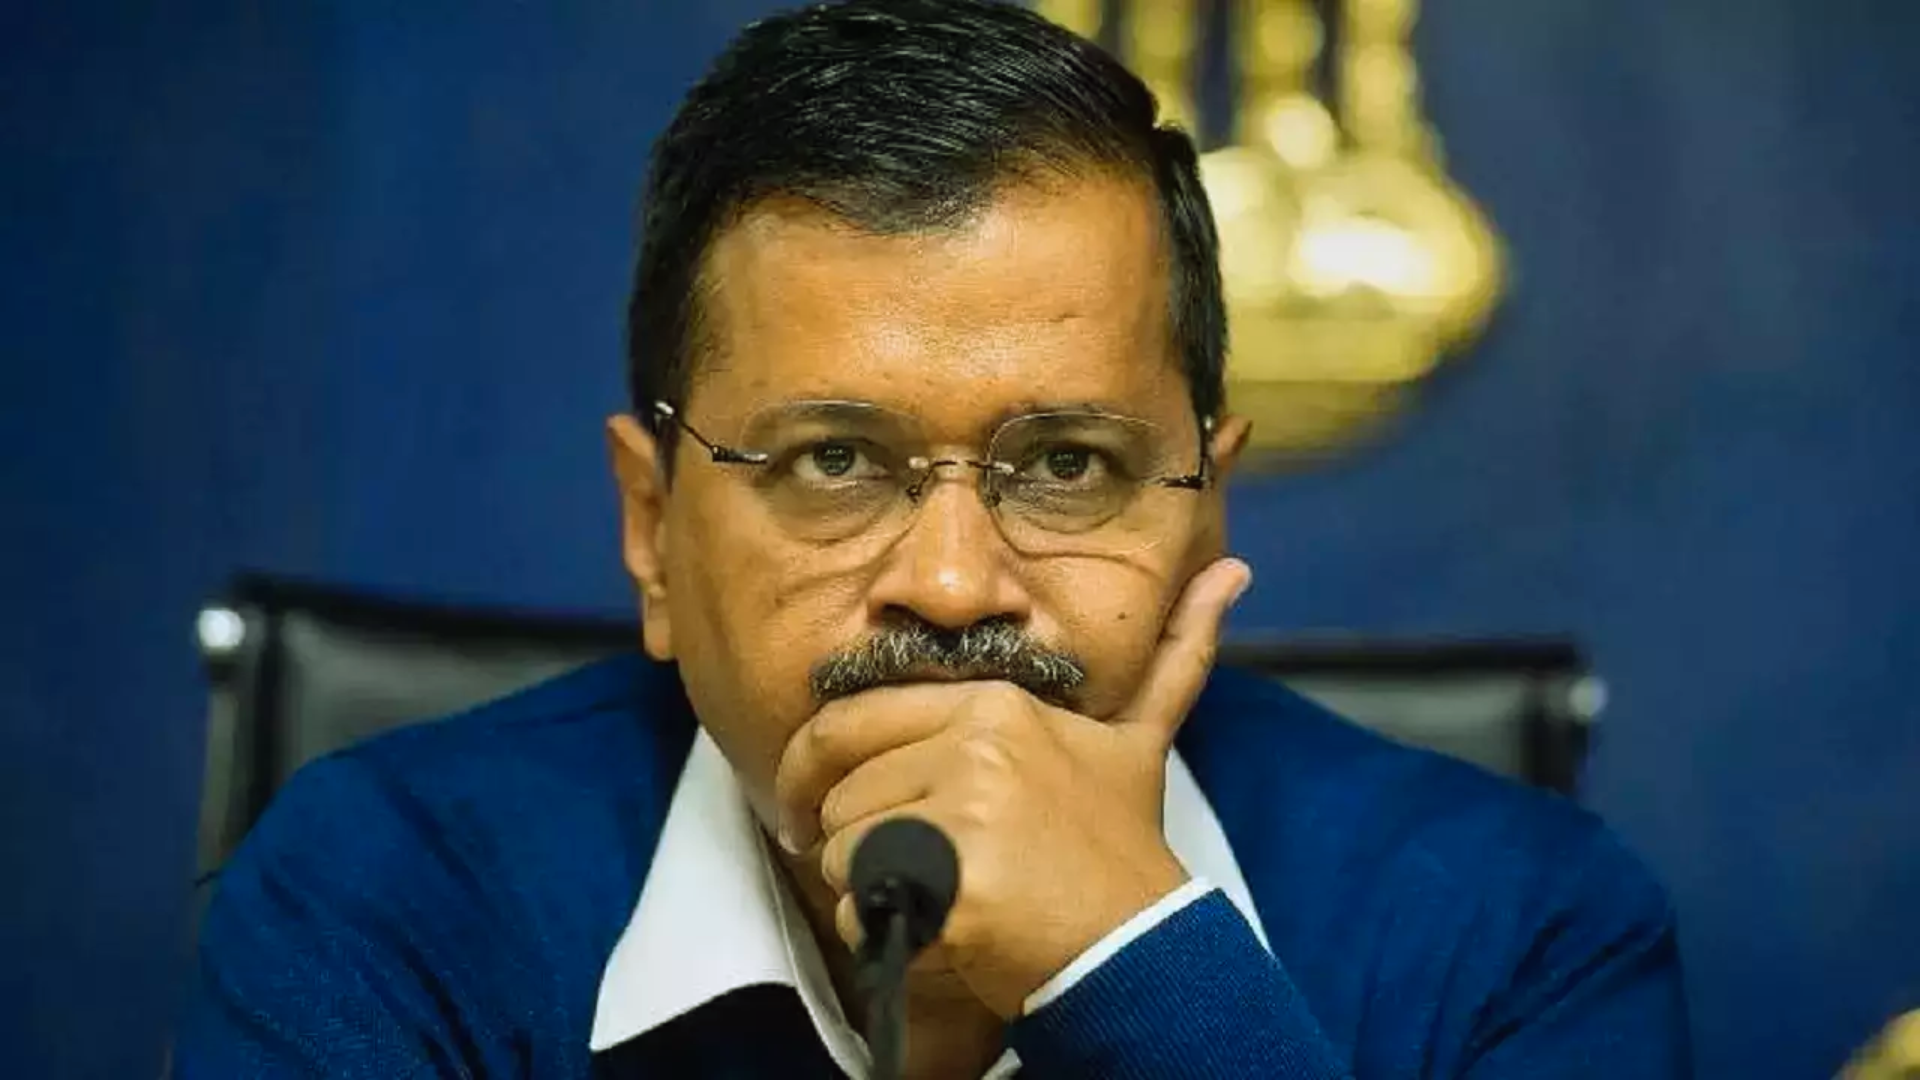 “BJP will pass on our employments to immigrants…”: Arvind Kejriwal on CAA